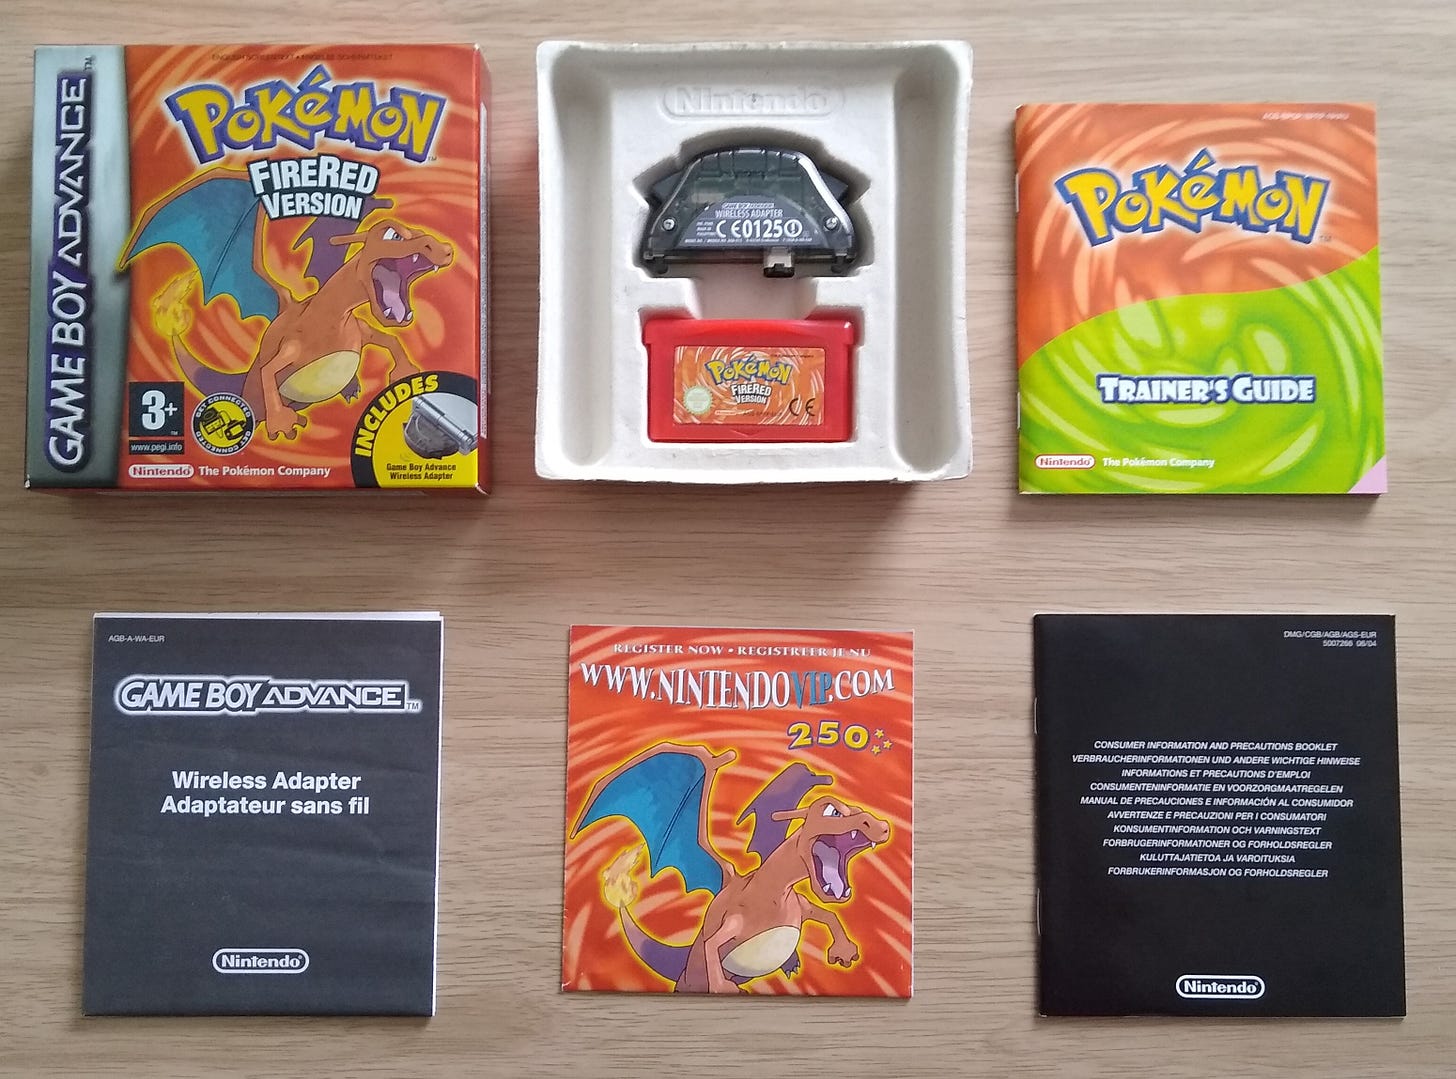 European Pokemon FireRed, complete in box (Photo credit: Johto TImes)